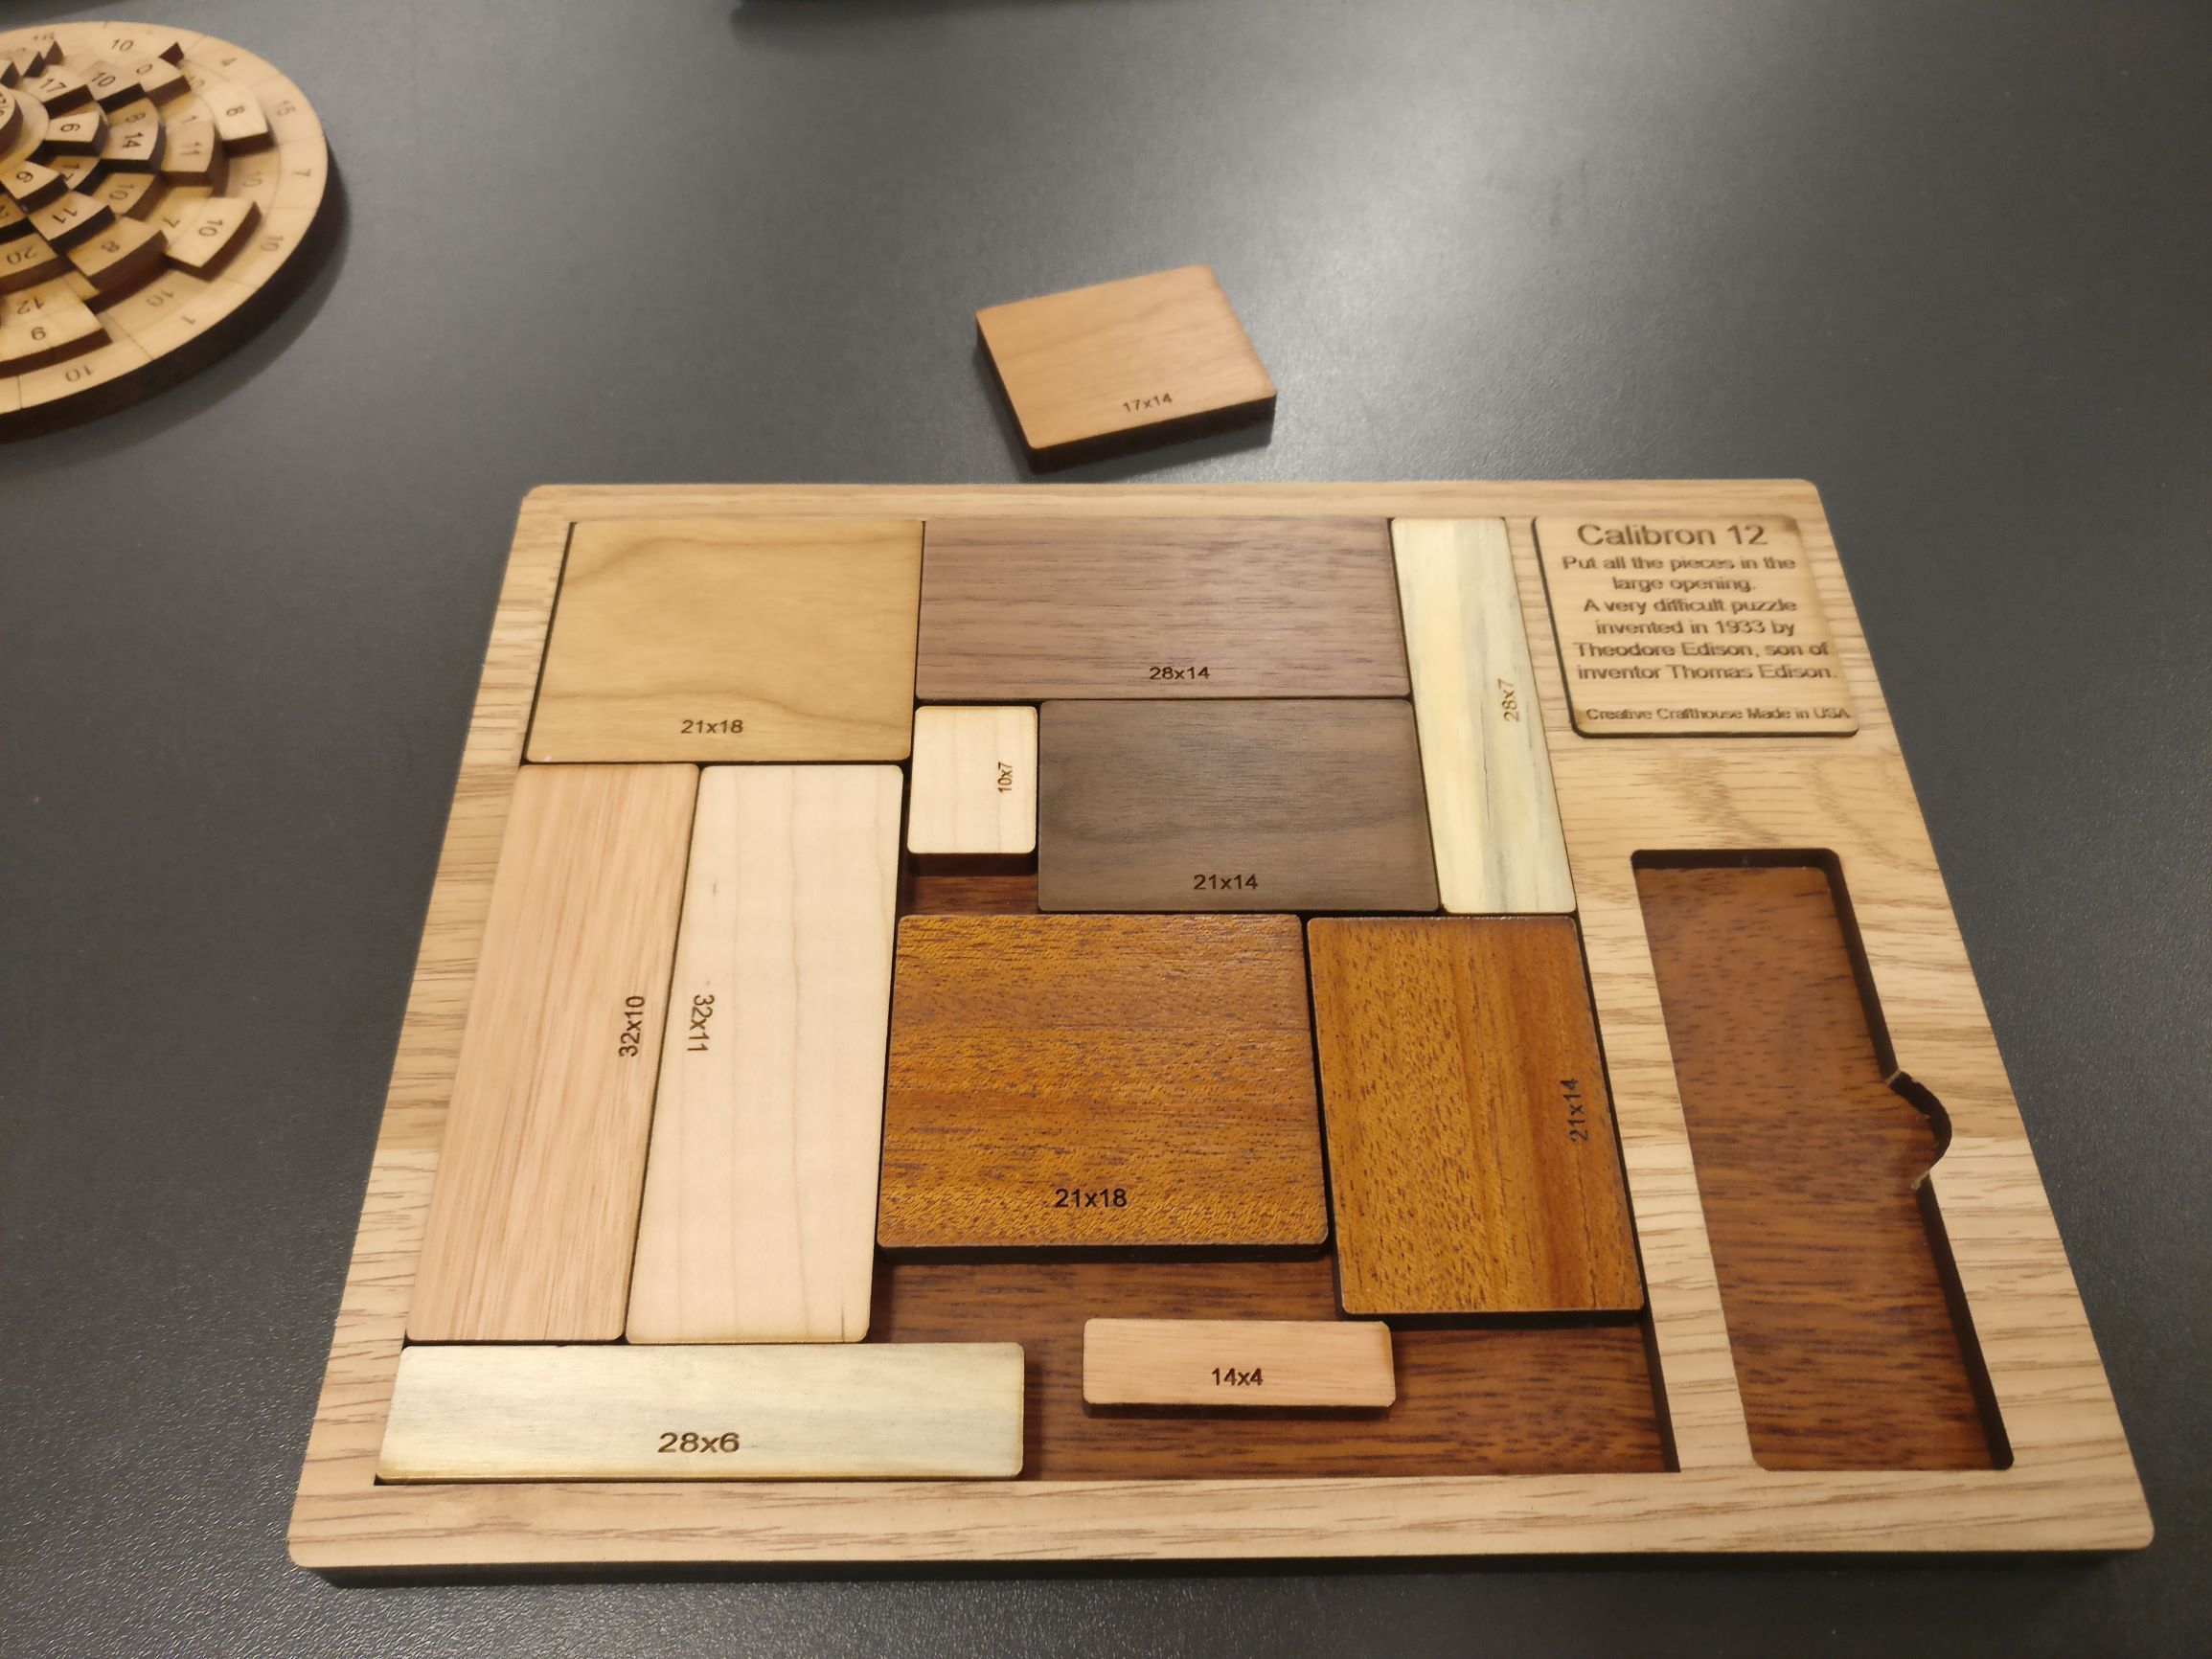 Solving Calibron 12, a very hard wooden block puzzle – Part 1